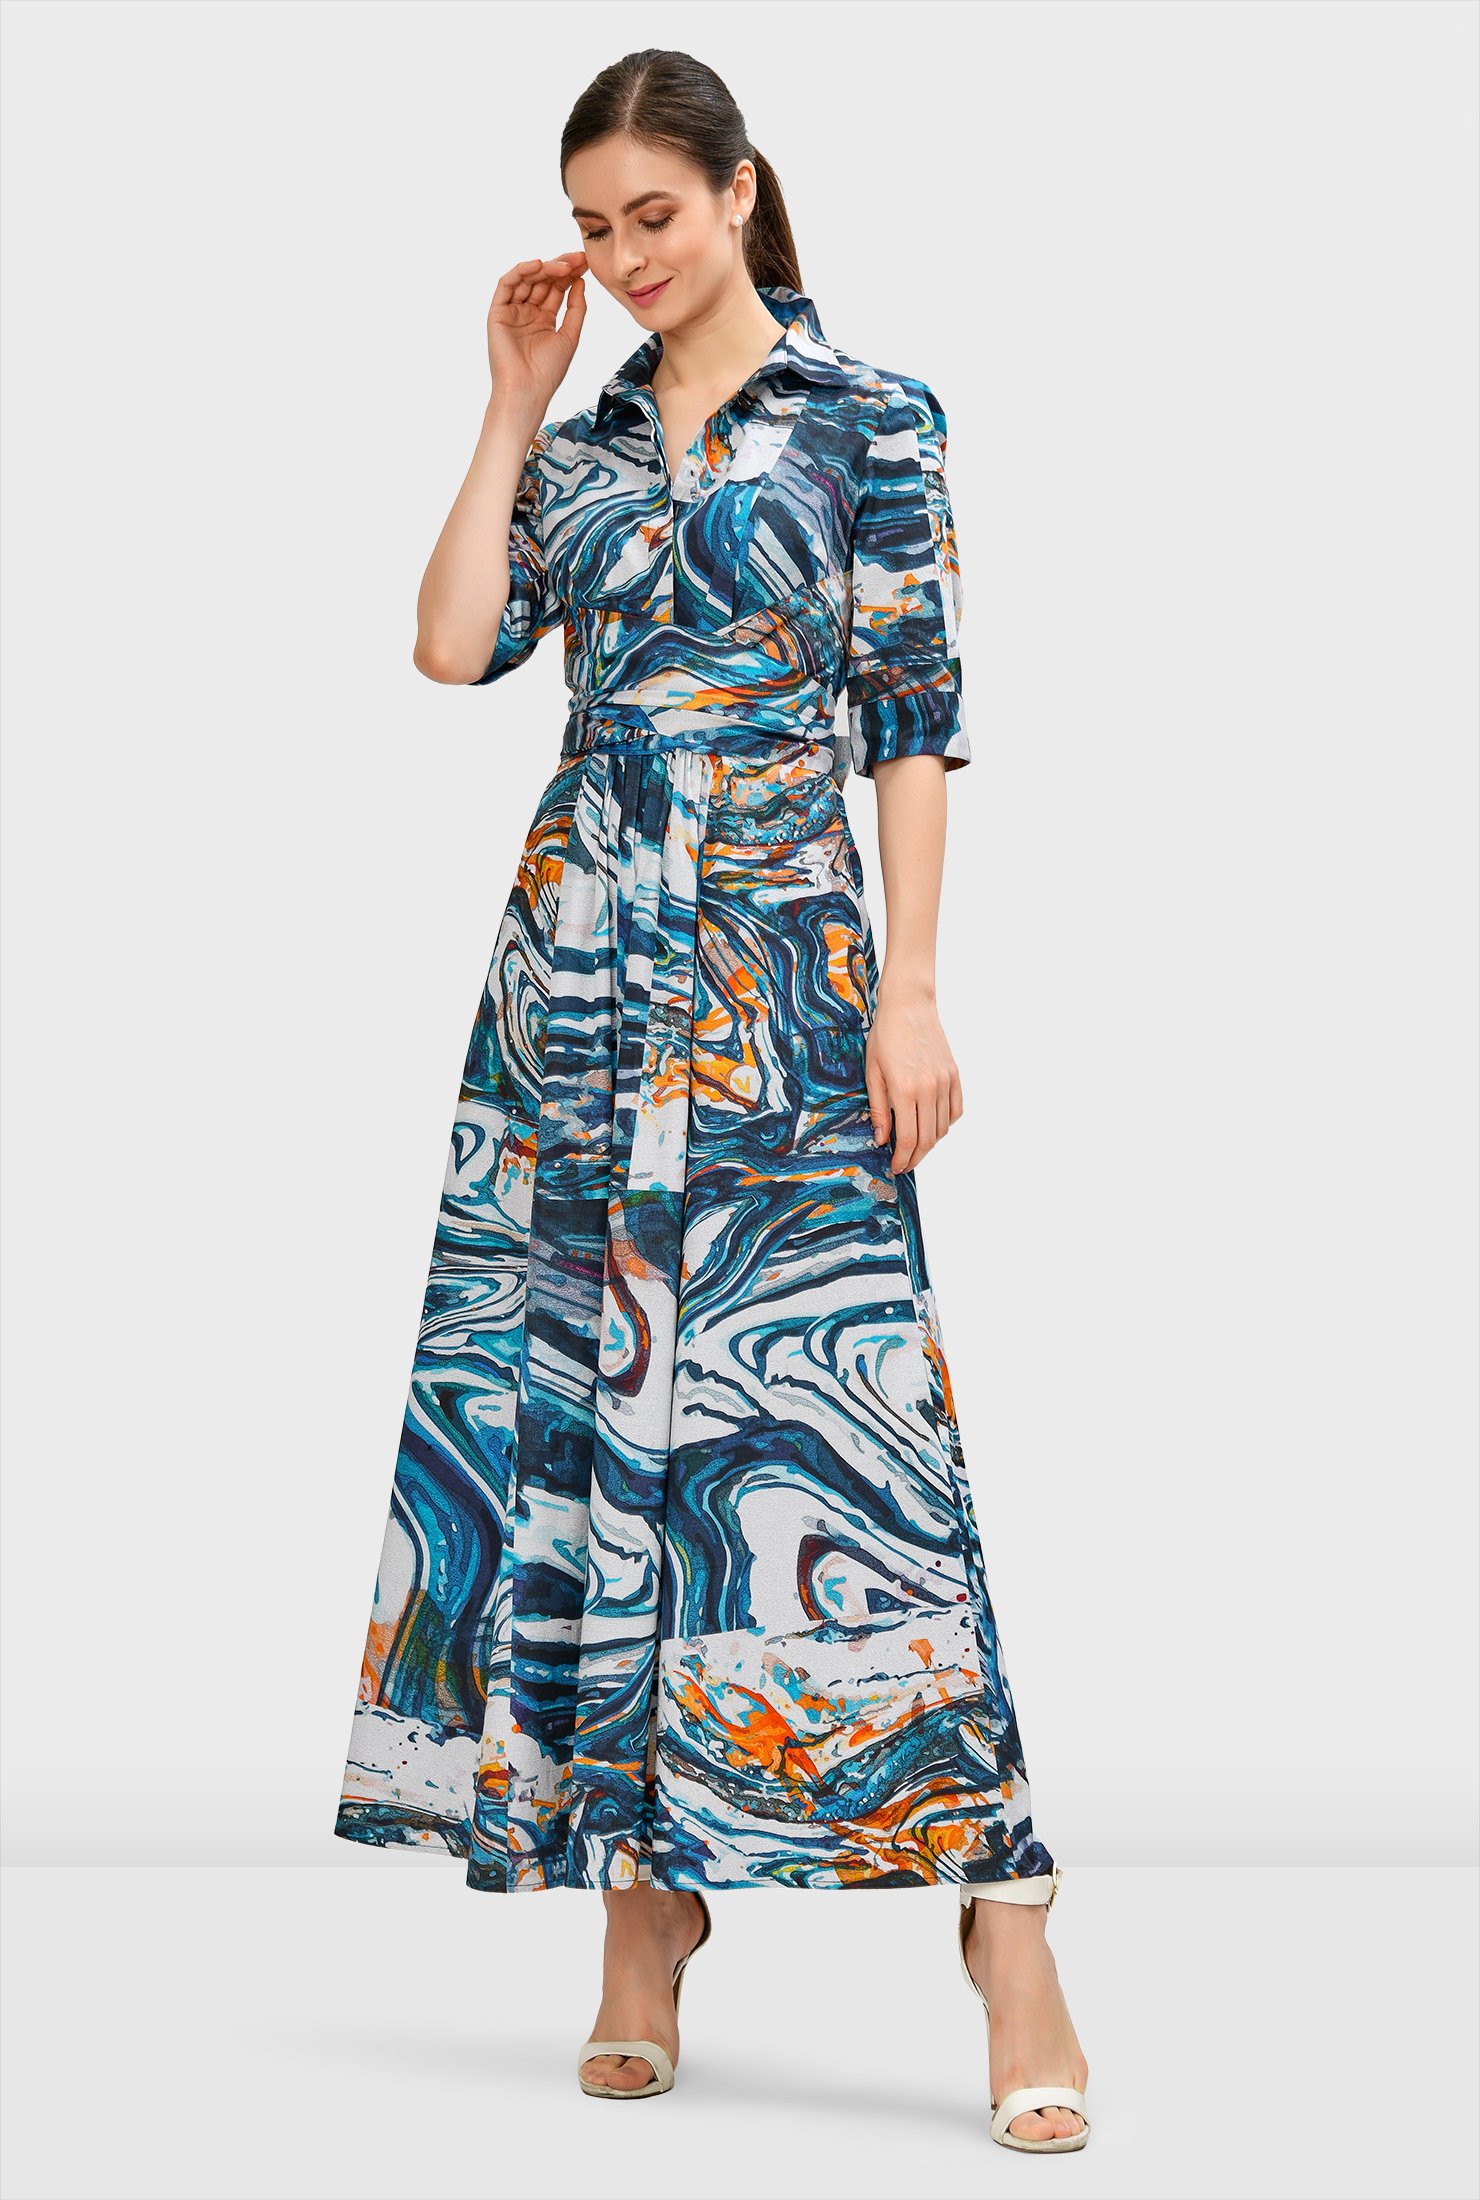 Elevate your abstract game in our chic maxi shirtdress fashioned with a smart spread collar, pleated cross-front at the empire waist and a ruched pleat full skirt.